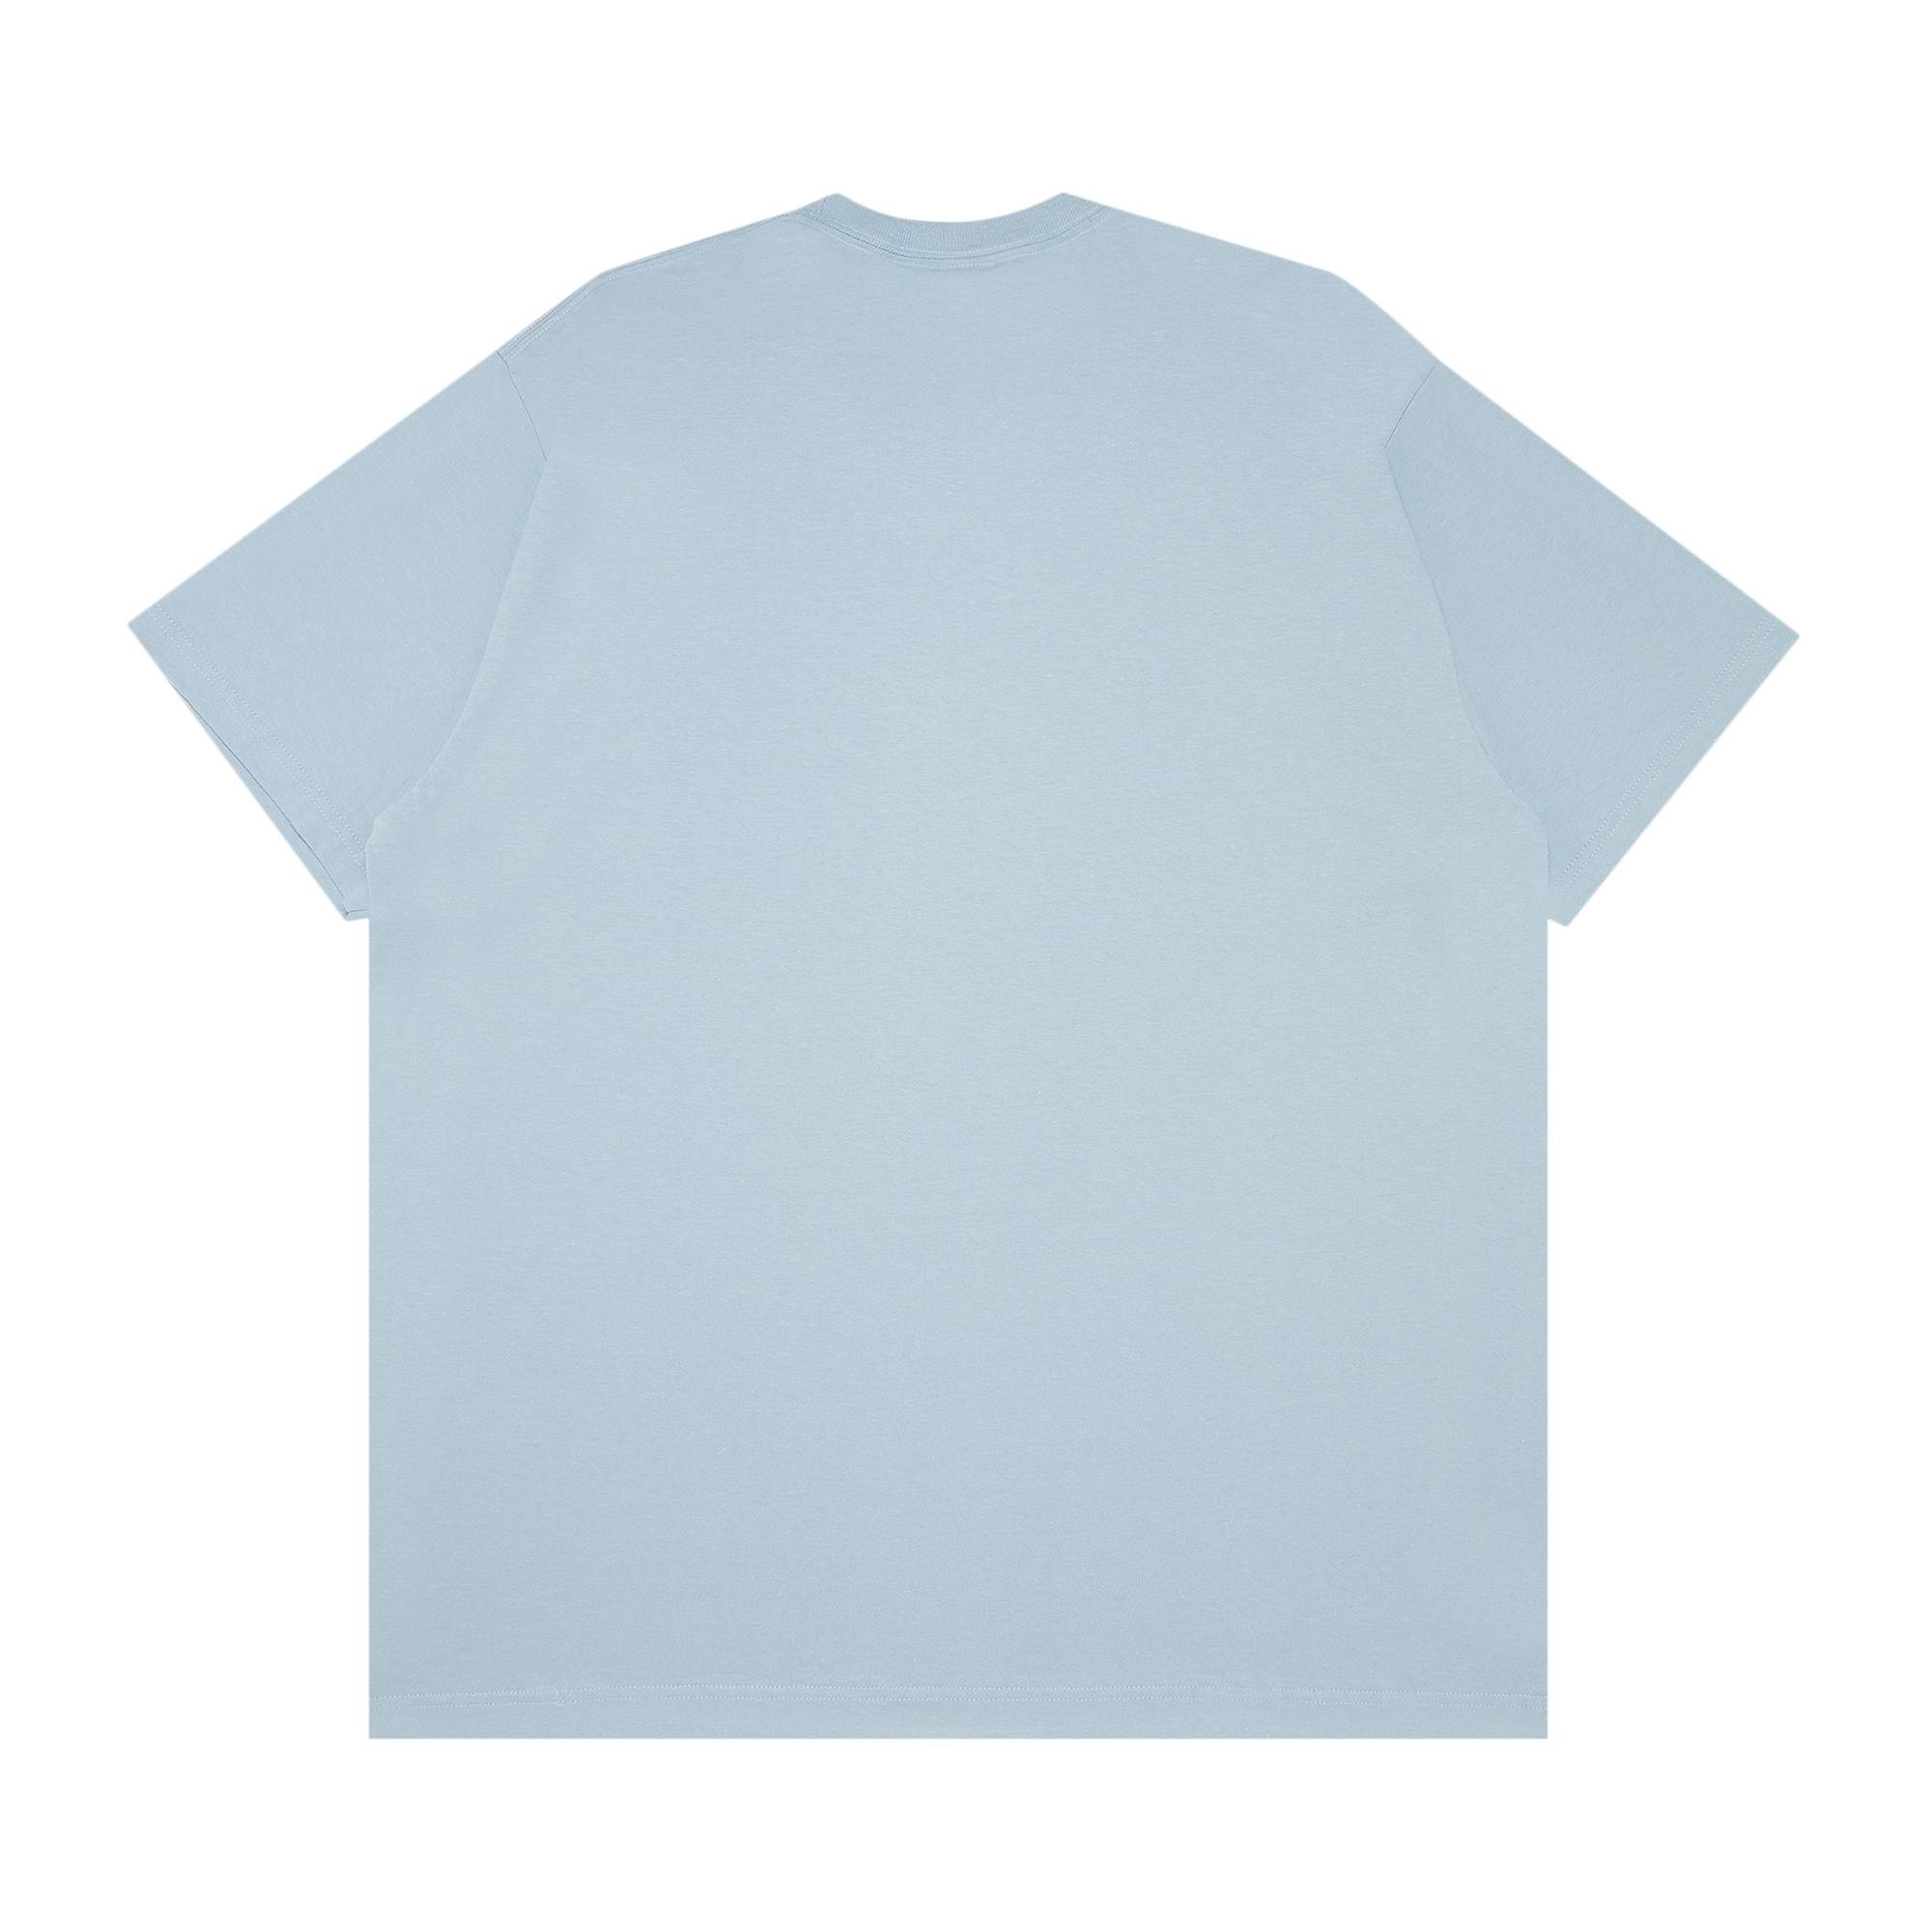 Supreme Tradition Tee 'Dusty Blue' - 2